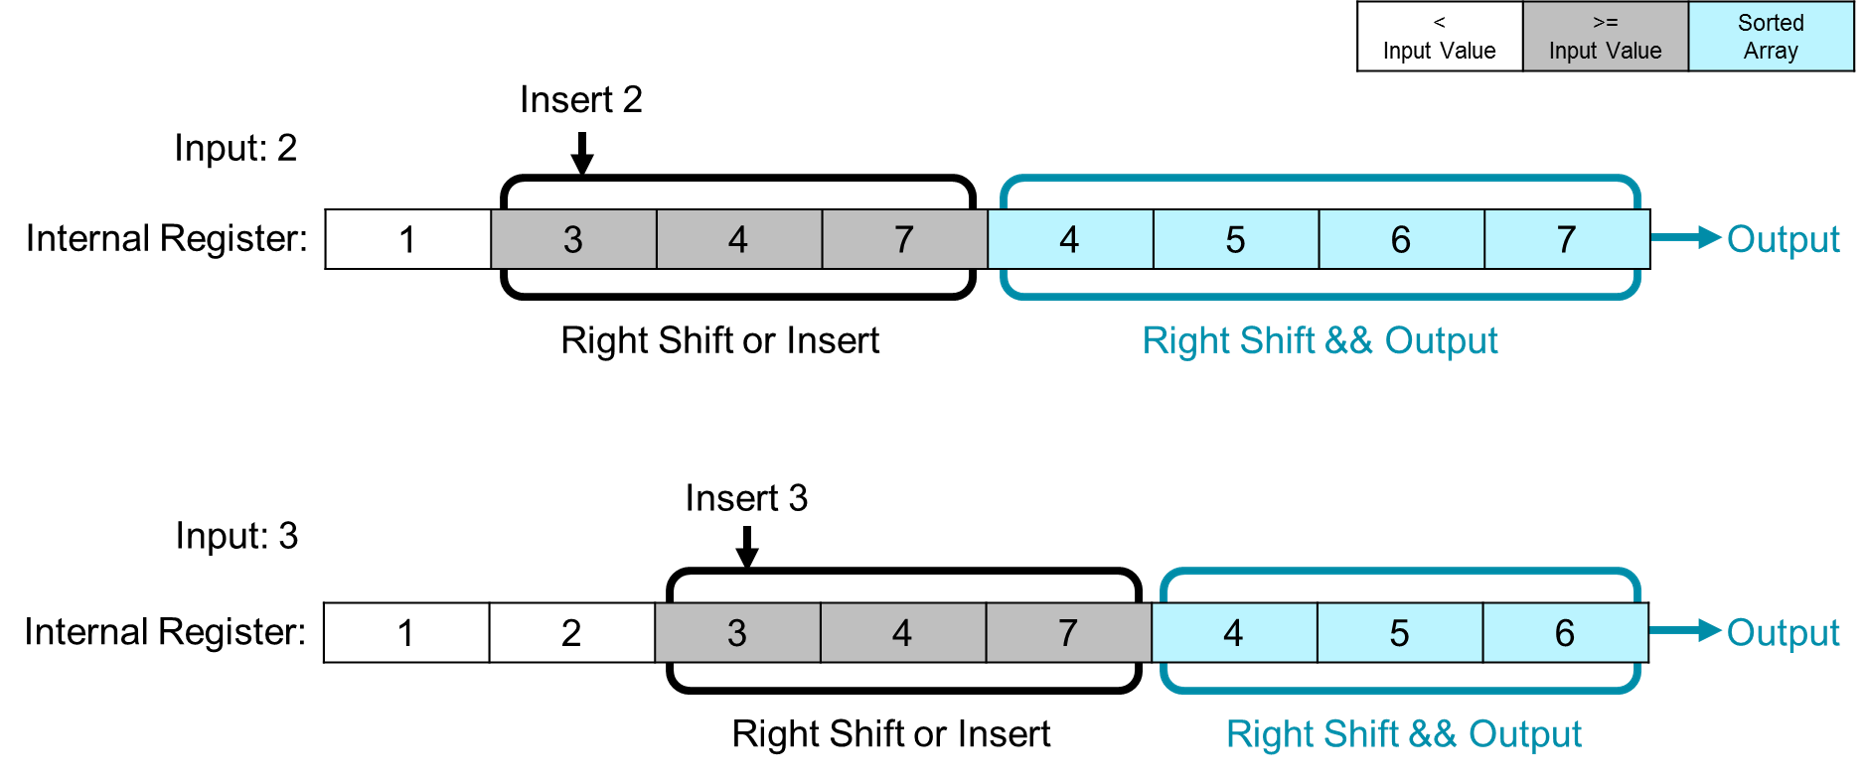 Insert Sort Processing  Structure